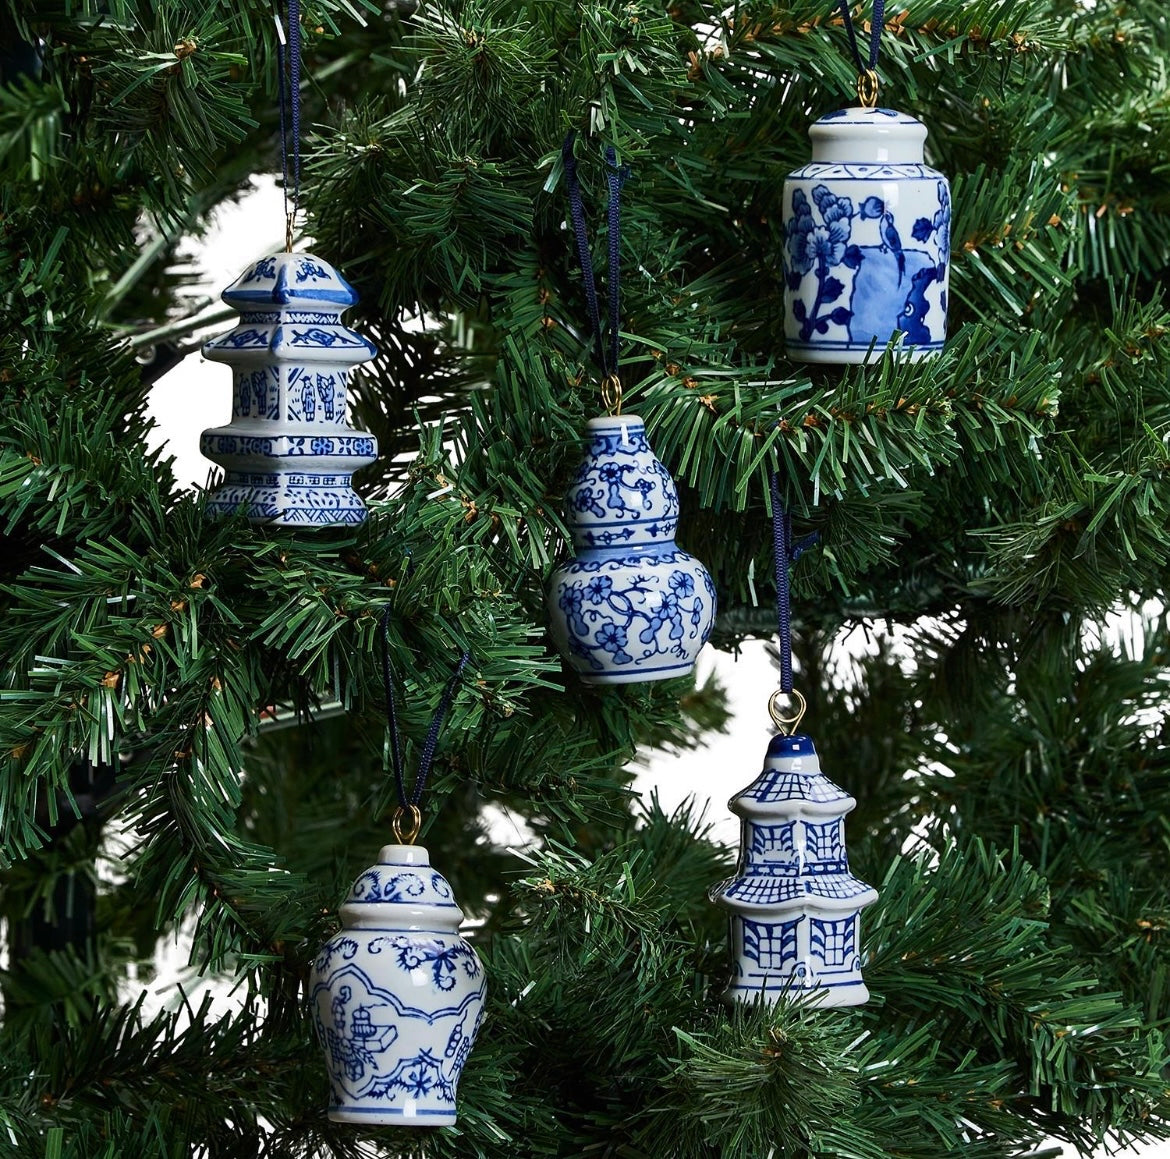 Blue and white ornaments or place cards